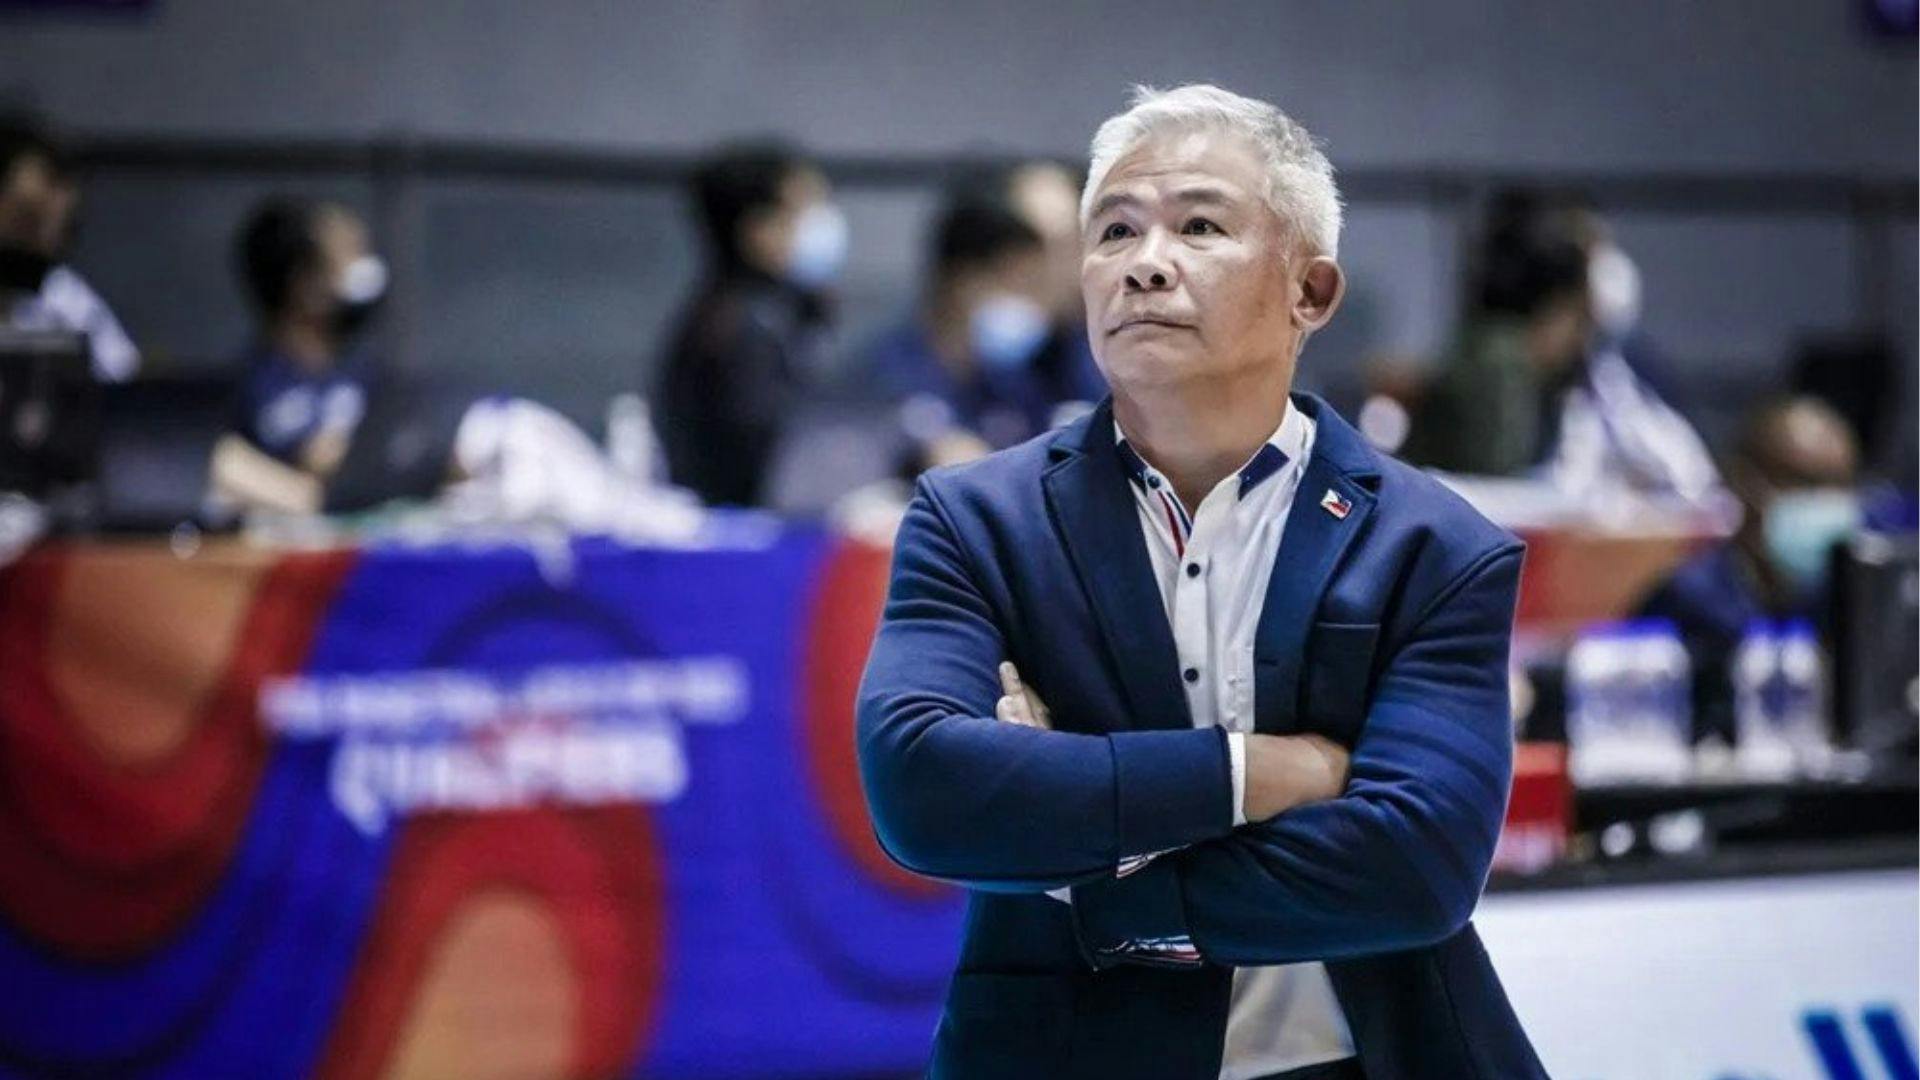 Chot Reyes also stresses goal of Gilas Pilipinas making it to 2024 Paris Olympics